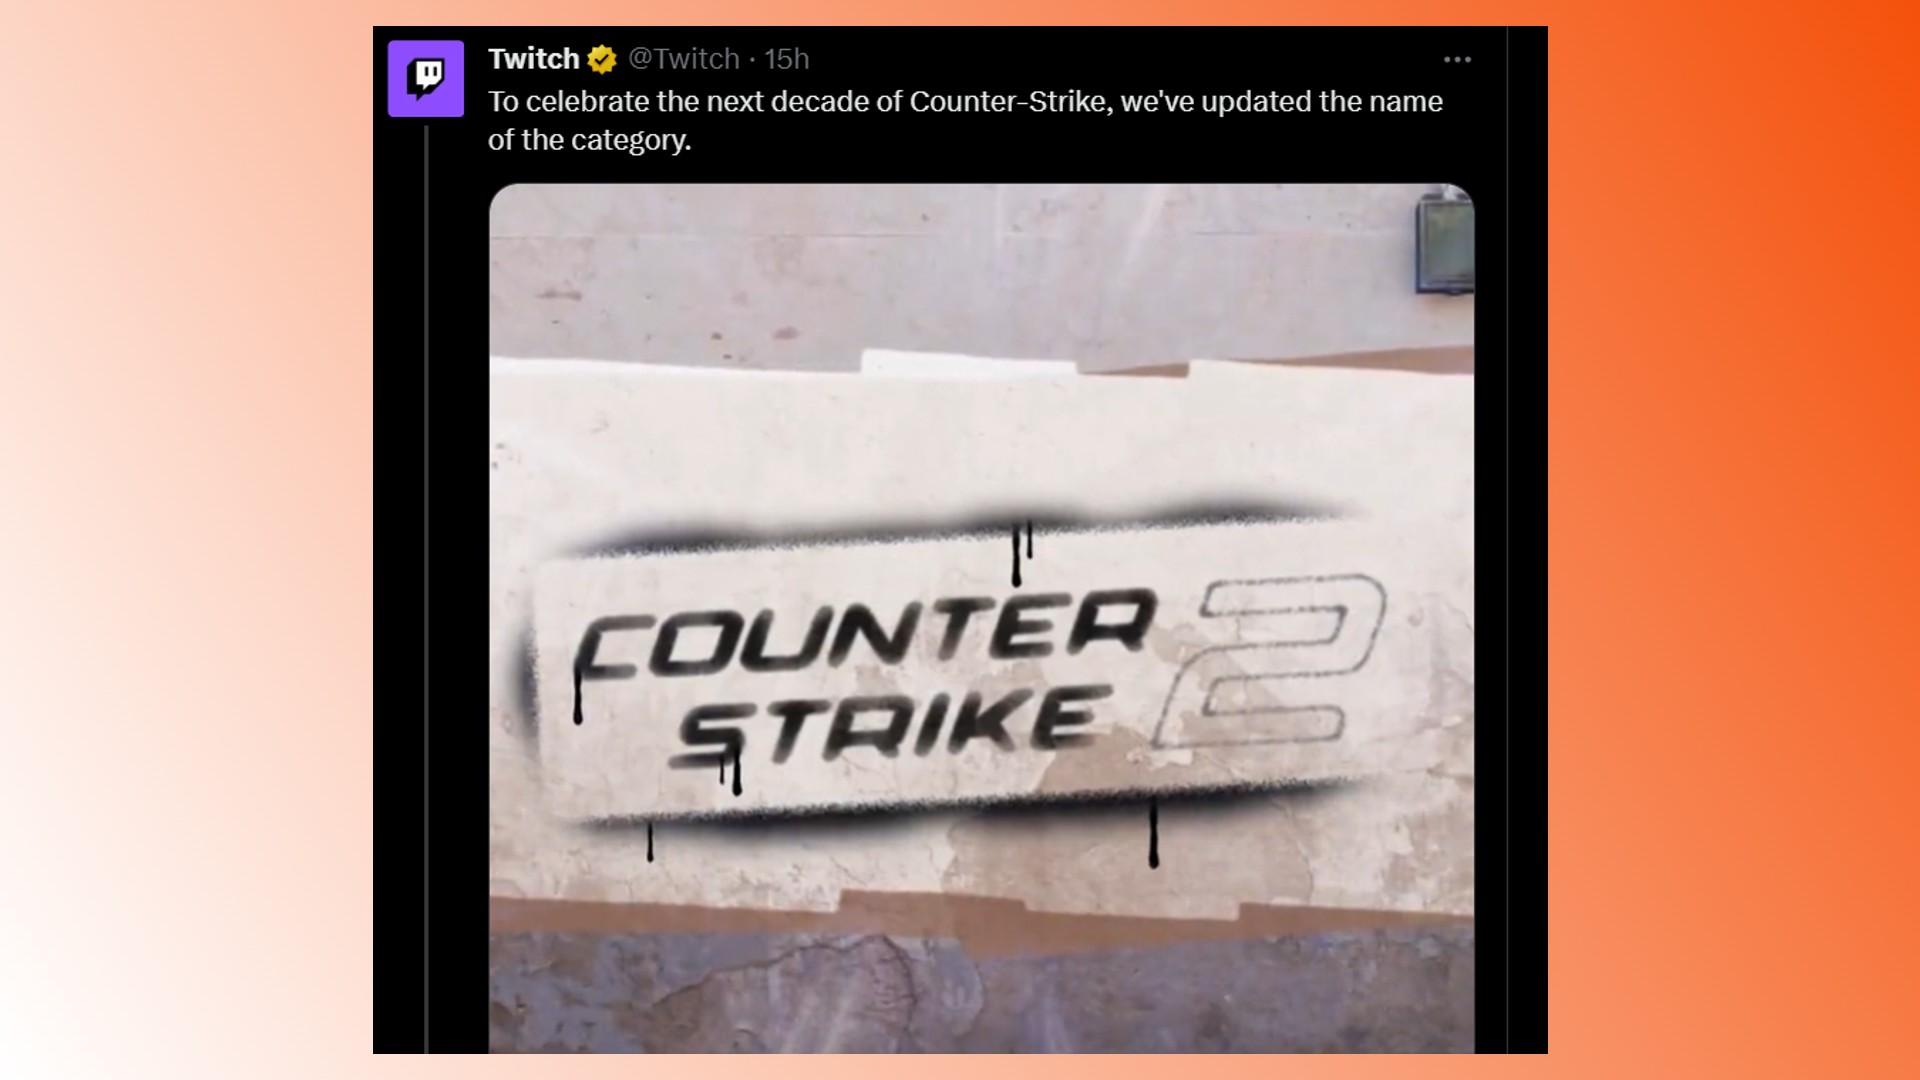 CSGO Twitch removed: A tweet from Twitch regarding Counter-Strike 2 and the removal of CSGO